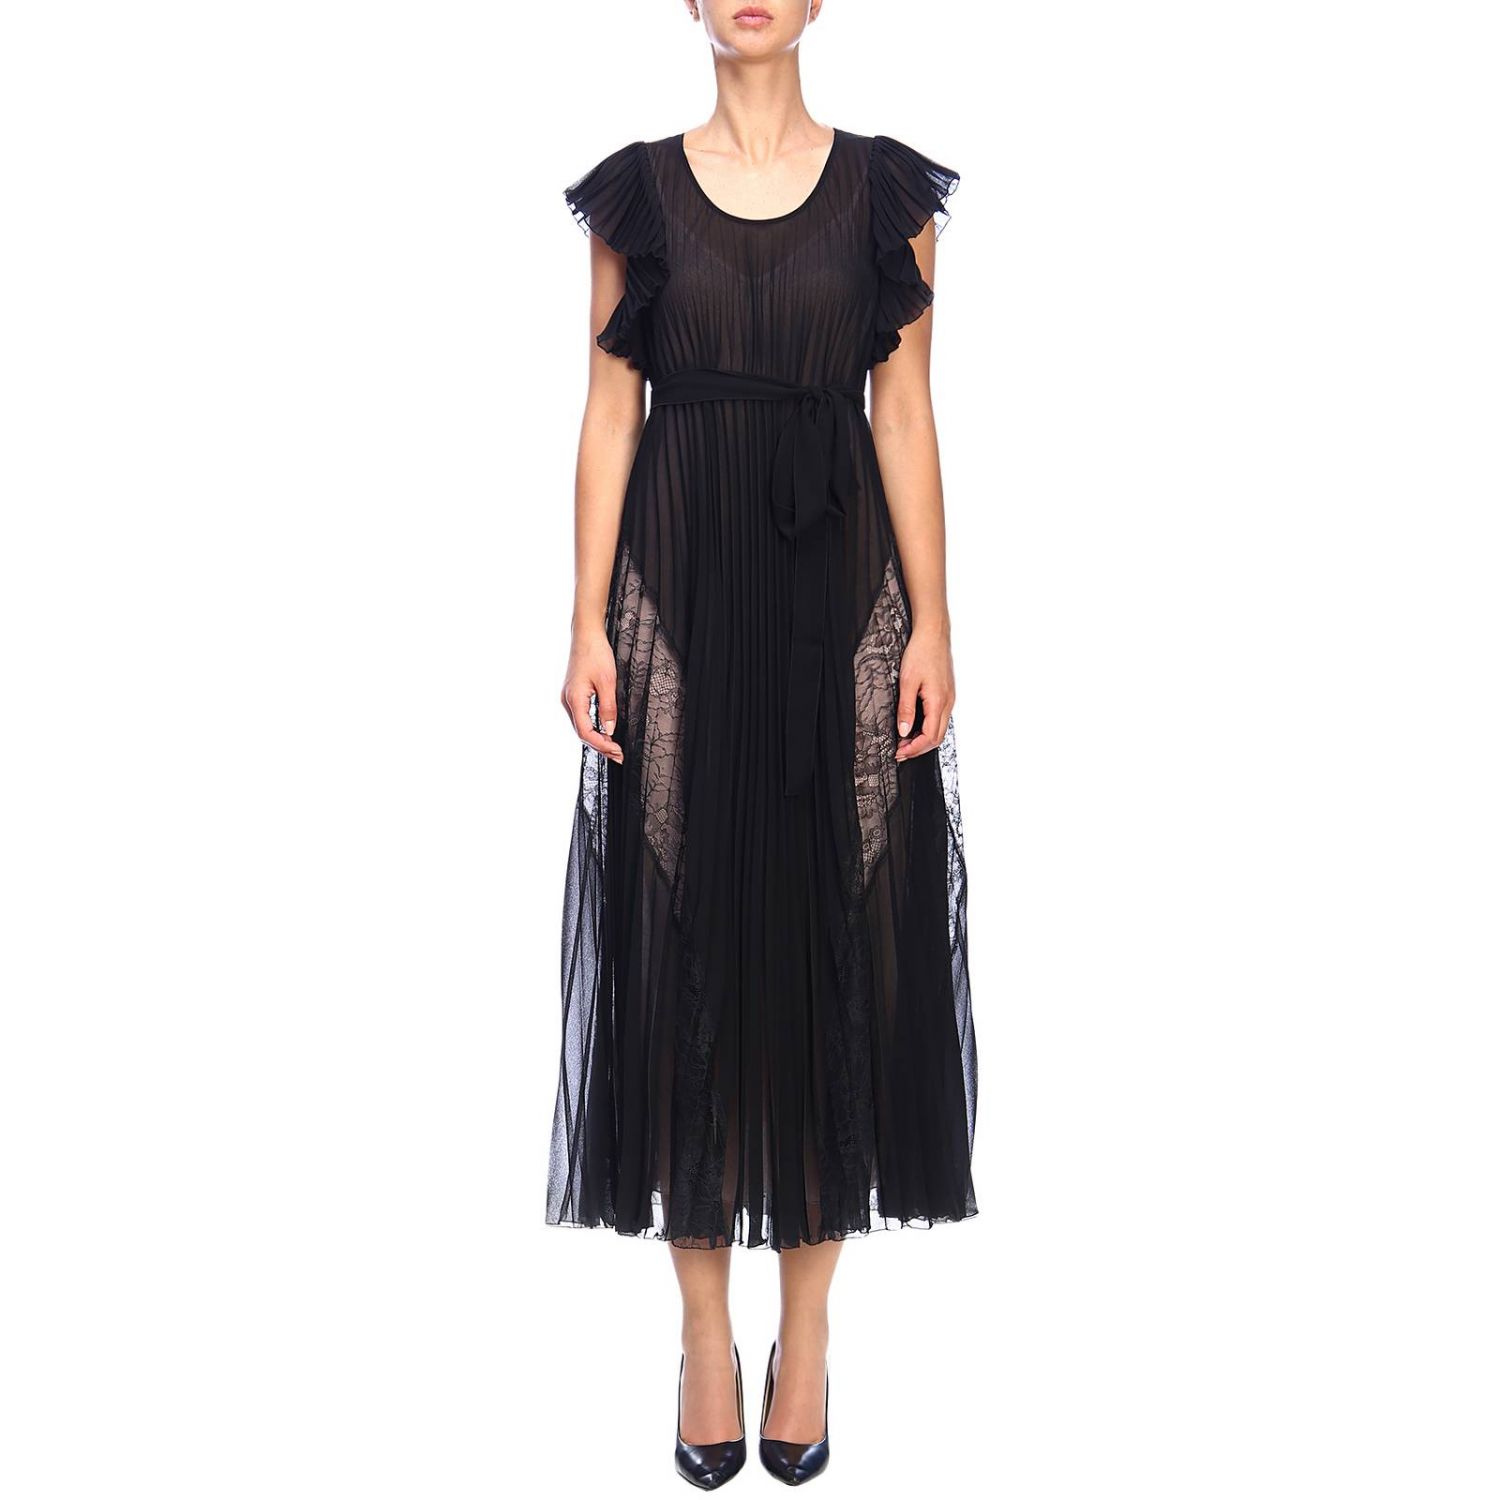 Boutique Moschino Outlet: dress in pleated fabric and lace - Black ...